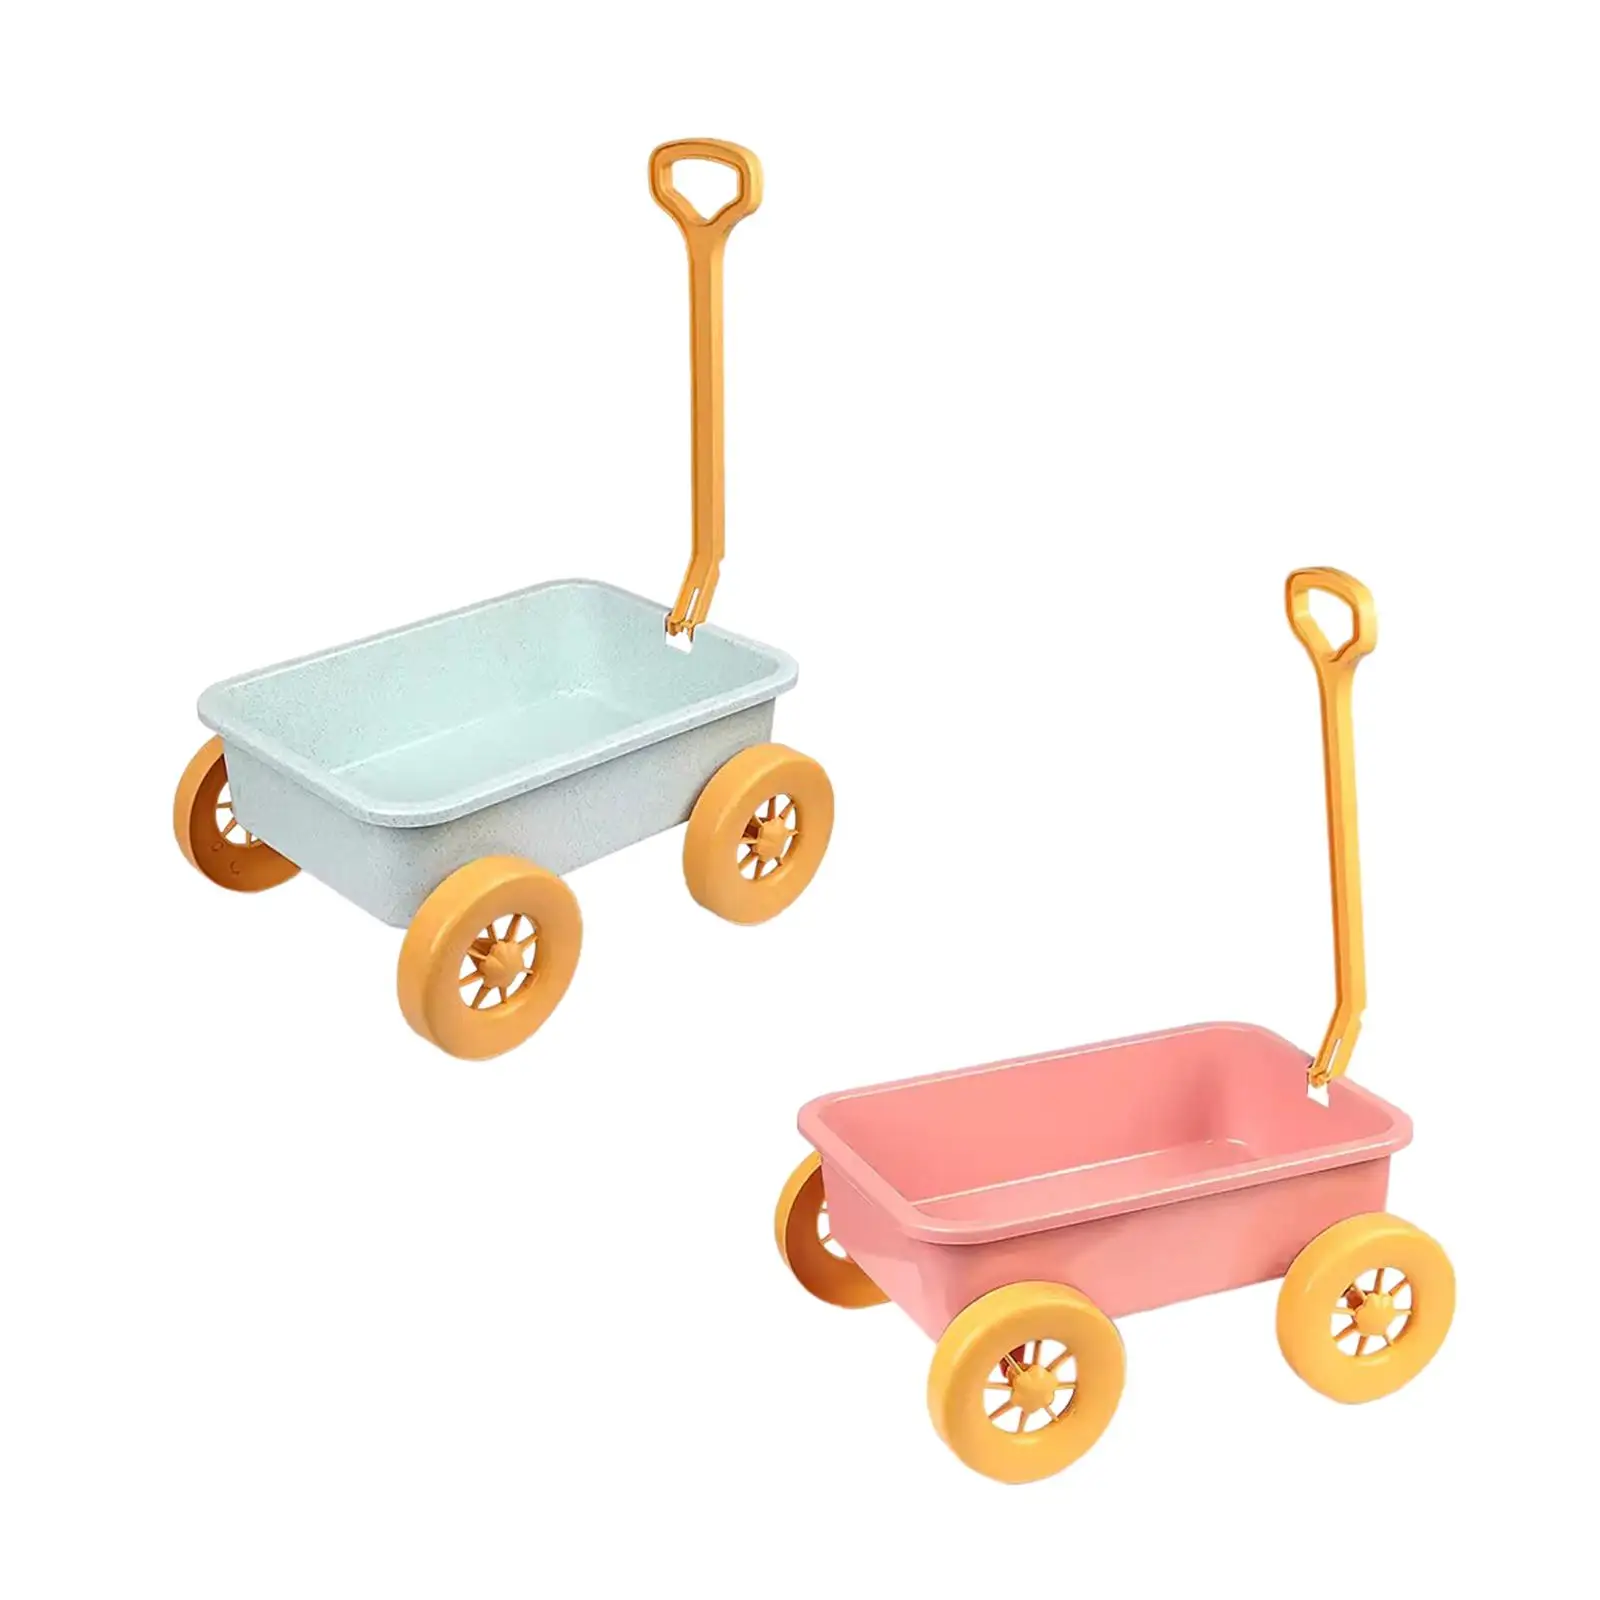 

Pretend Play Wagon Toy Outdoor Indoor Toy Portable Pull Car Toy Sand Toy Trolley for Outdoor Seaside Beach Gardening Summer